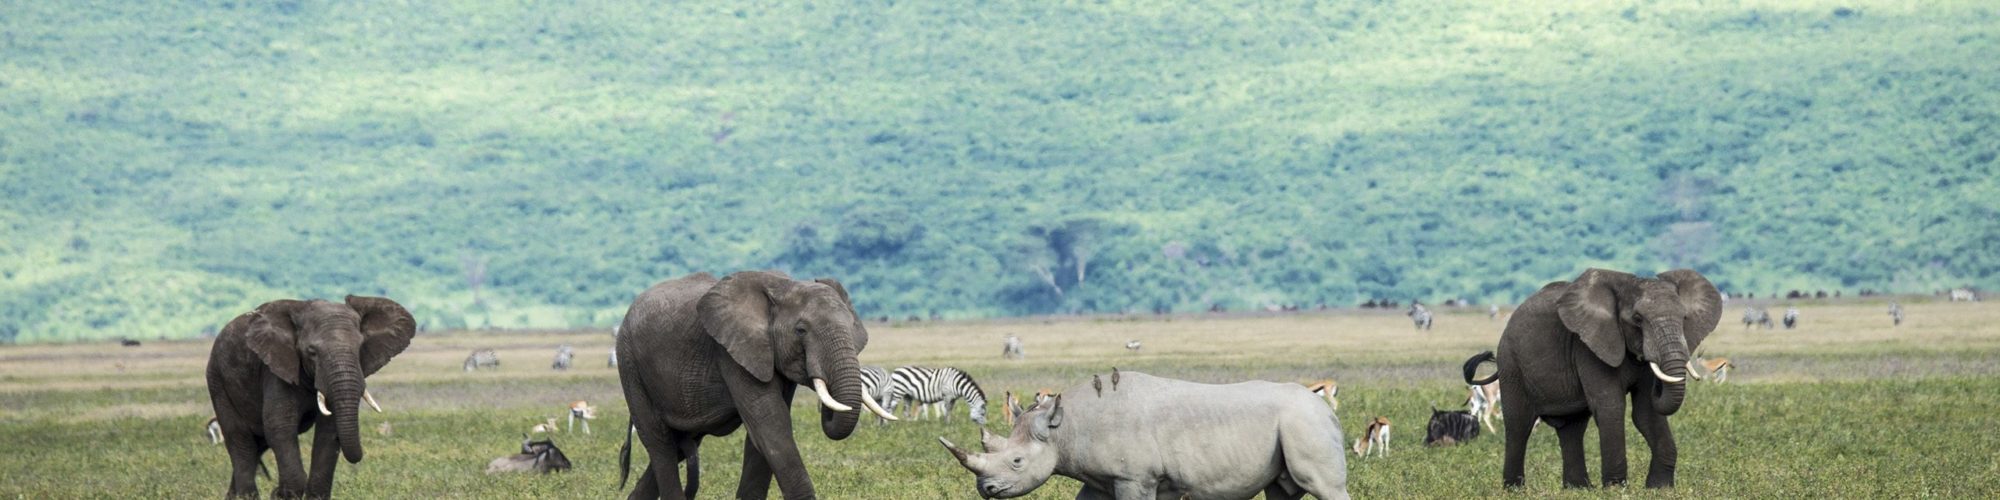 Ngorongoro Crater travel agents packages deals